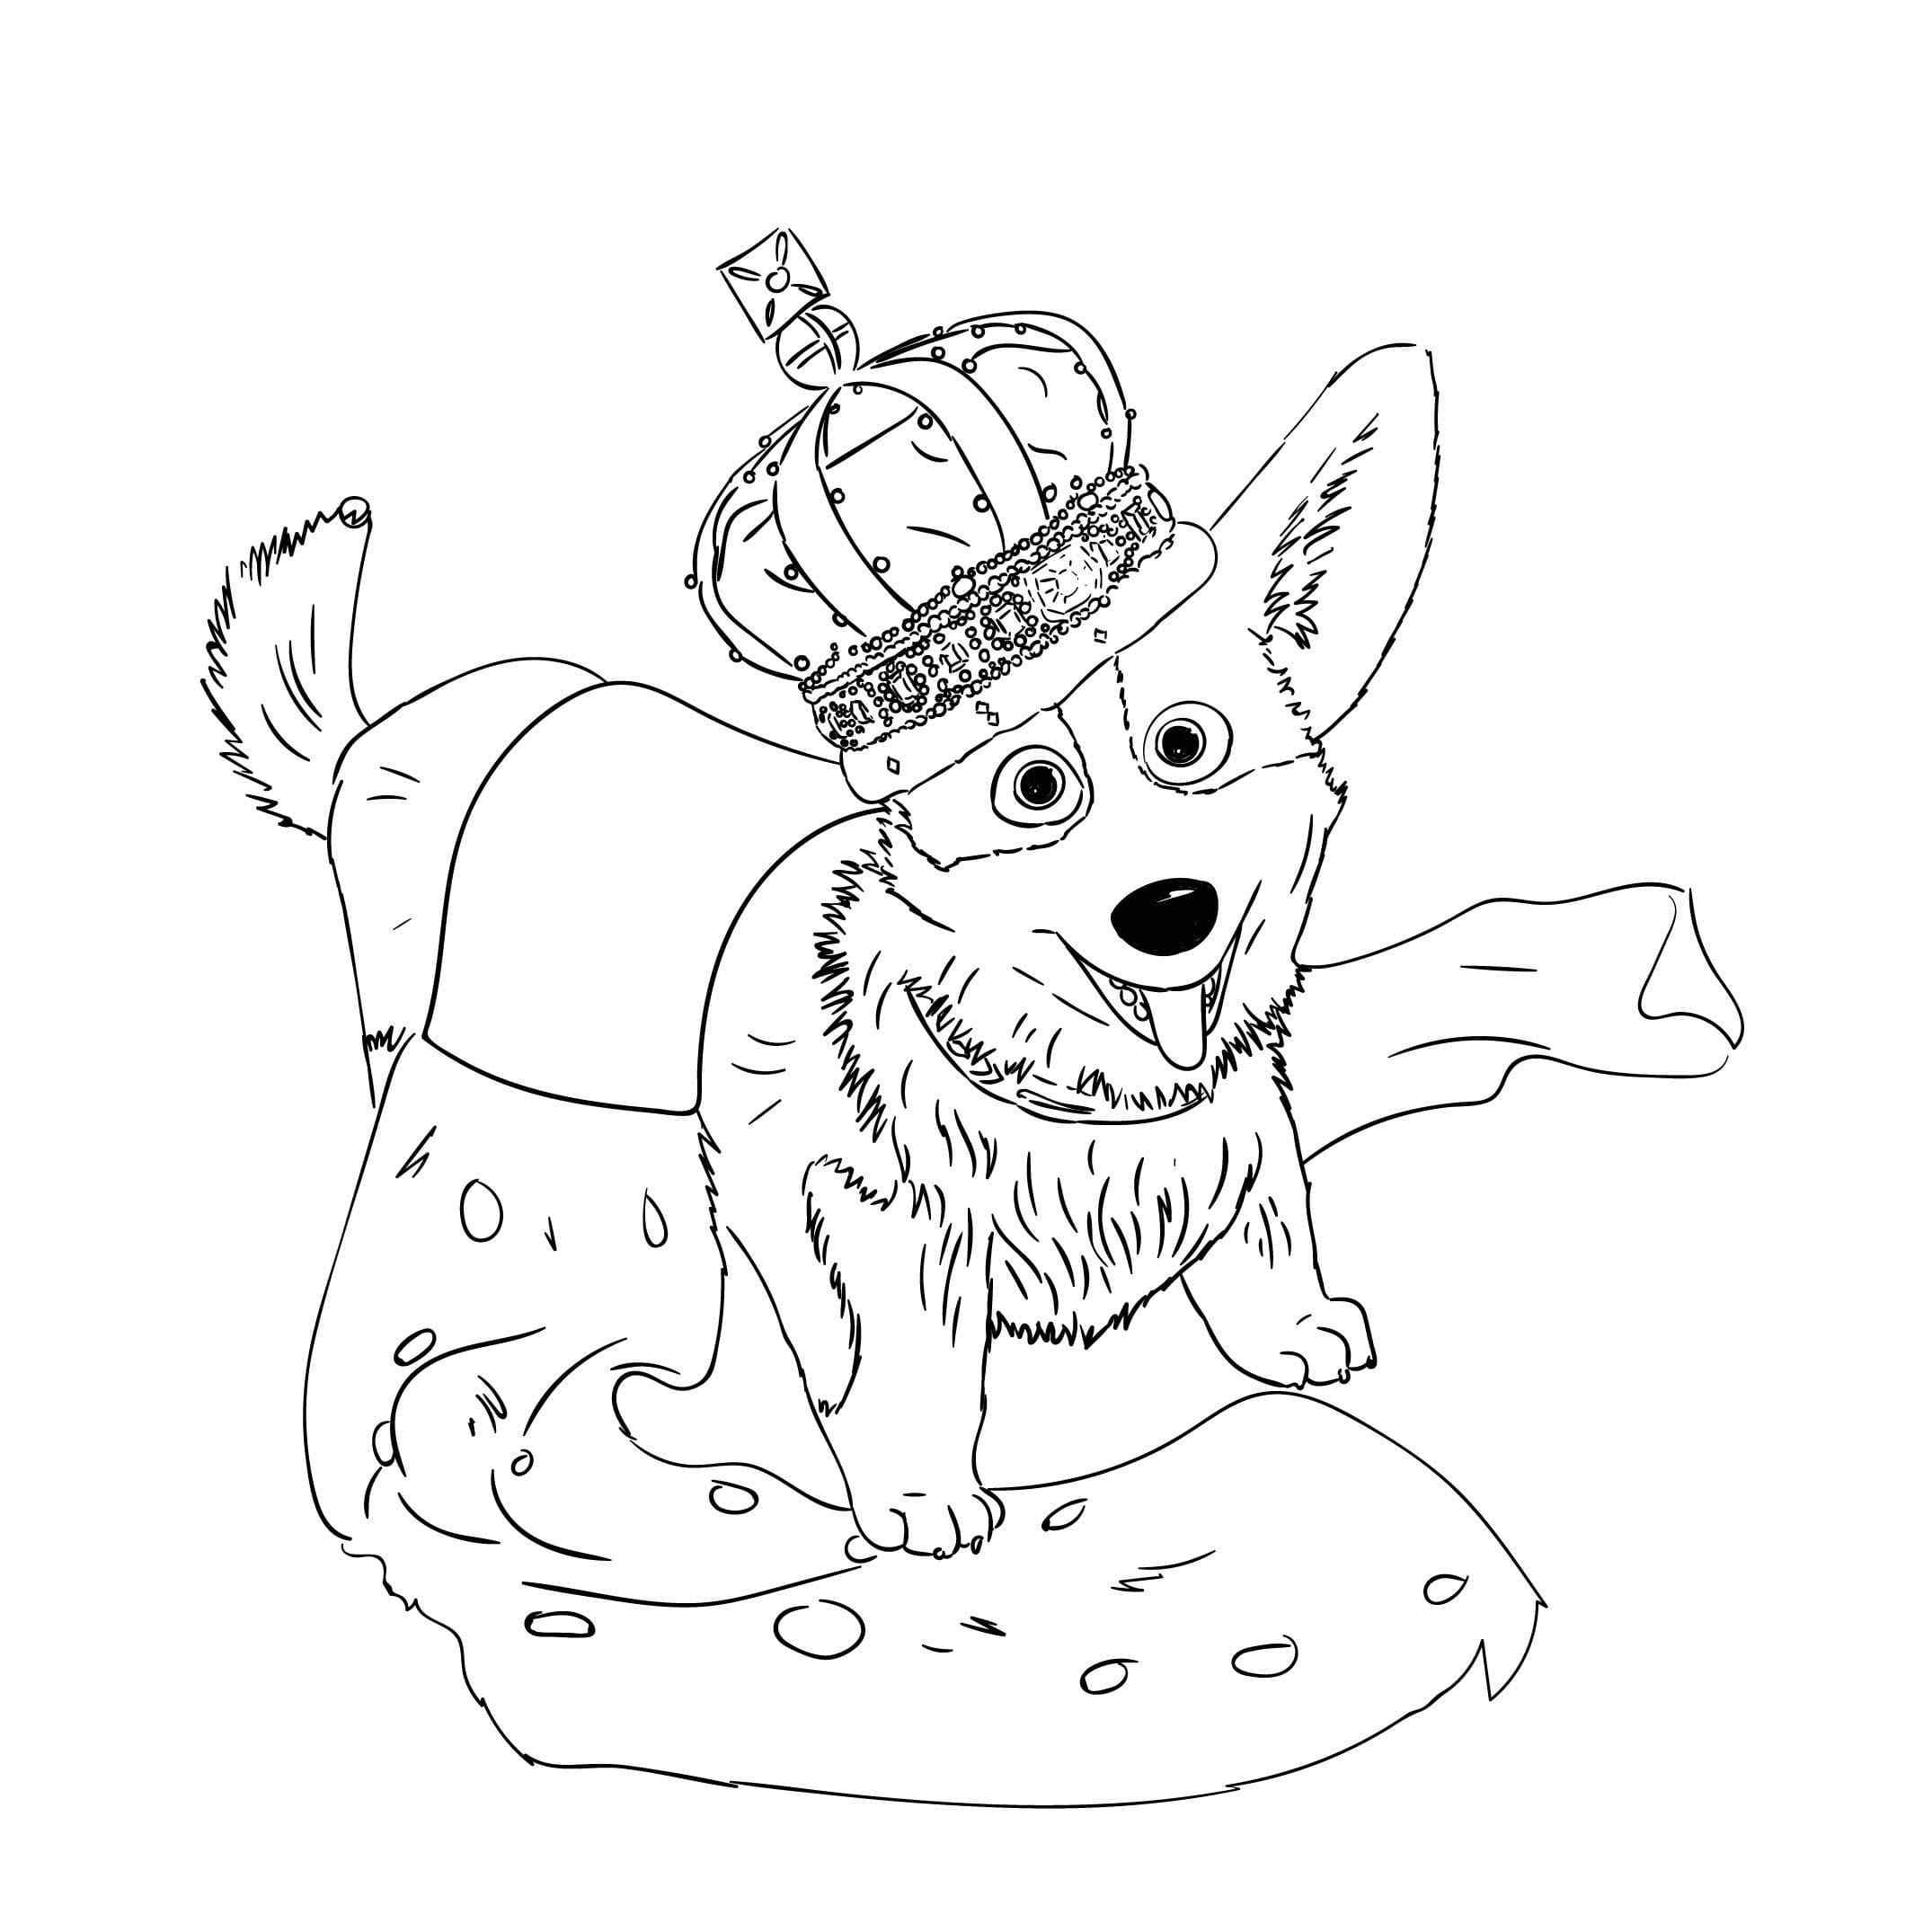 Charming Baby With A Crown On His Head